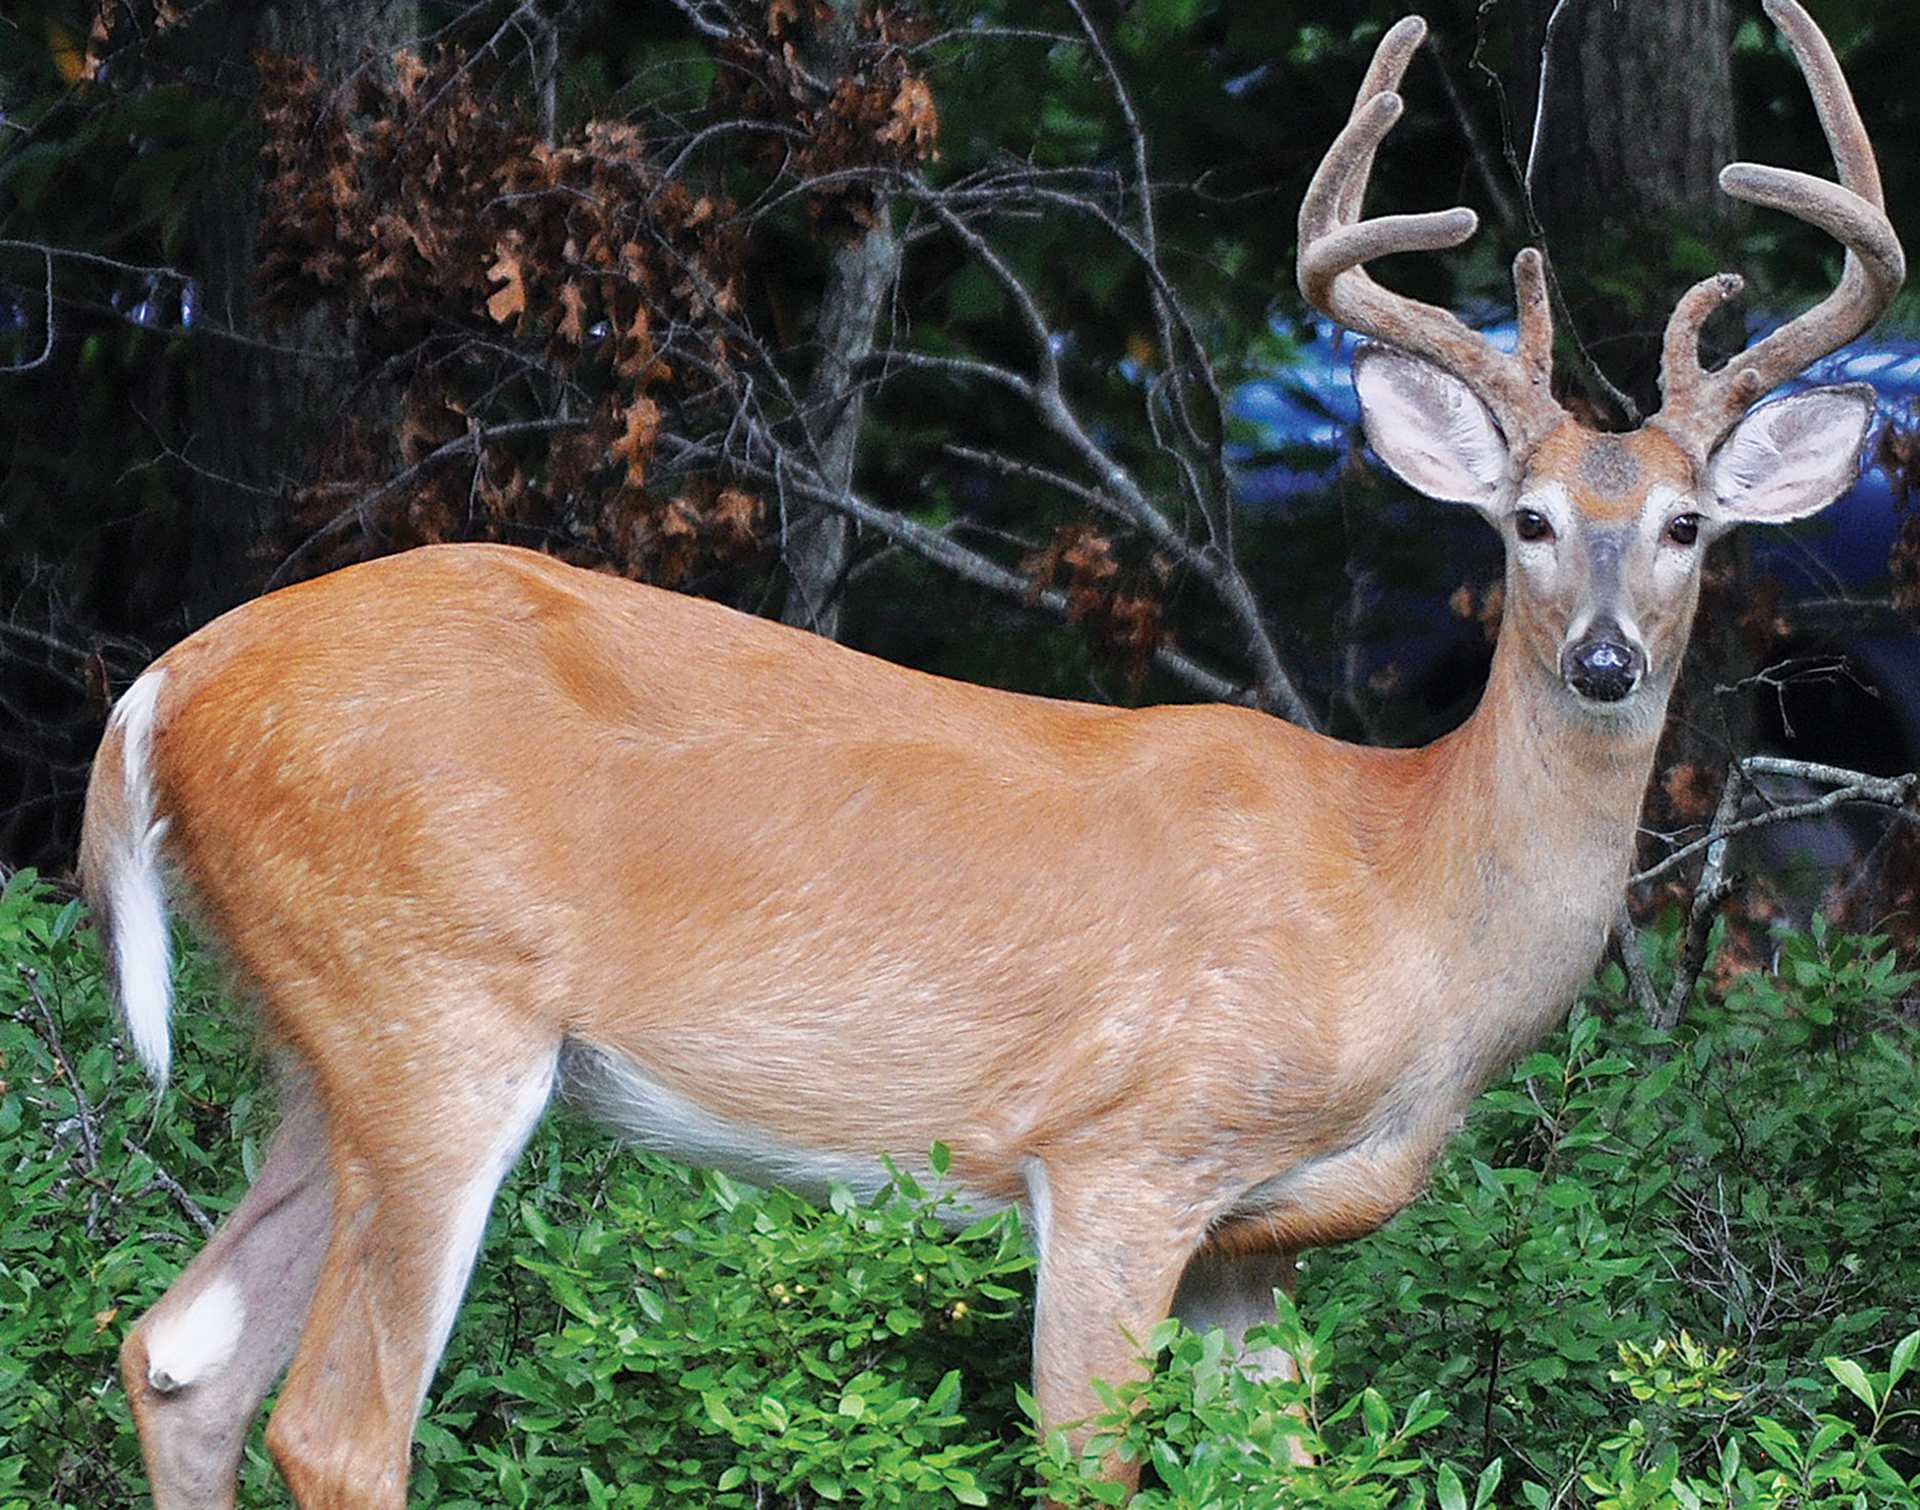 Scientists hope a “species barrier” will keep humans from catching CWD from deer